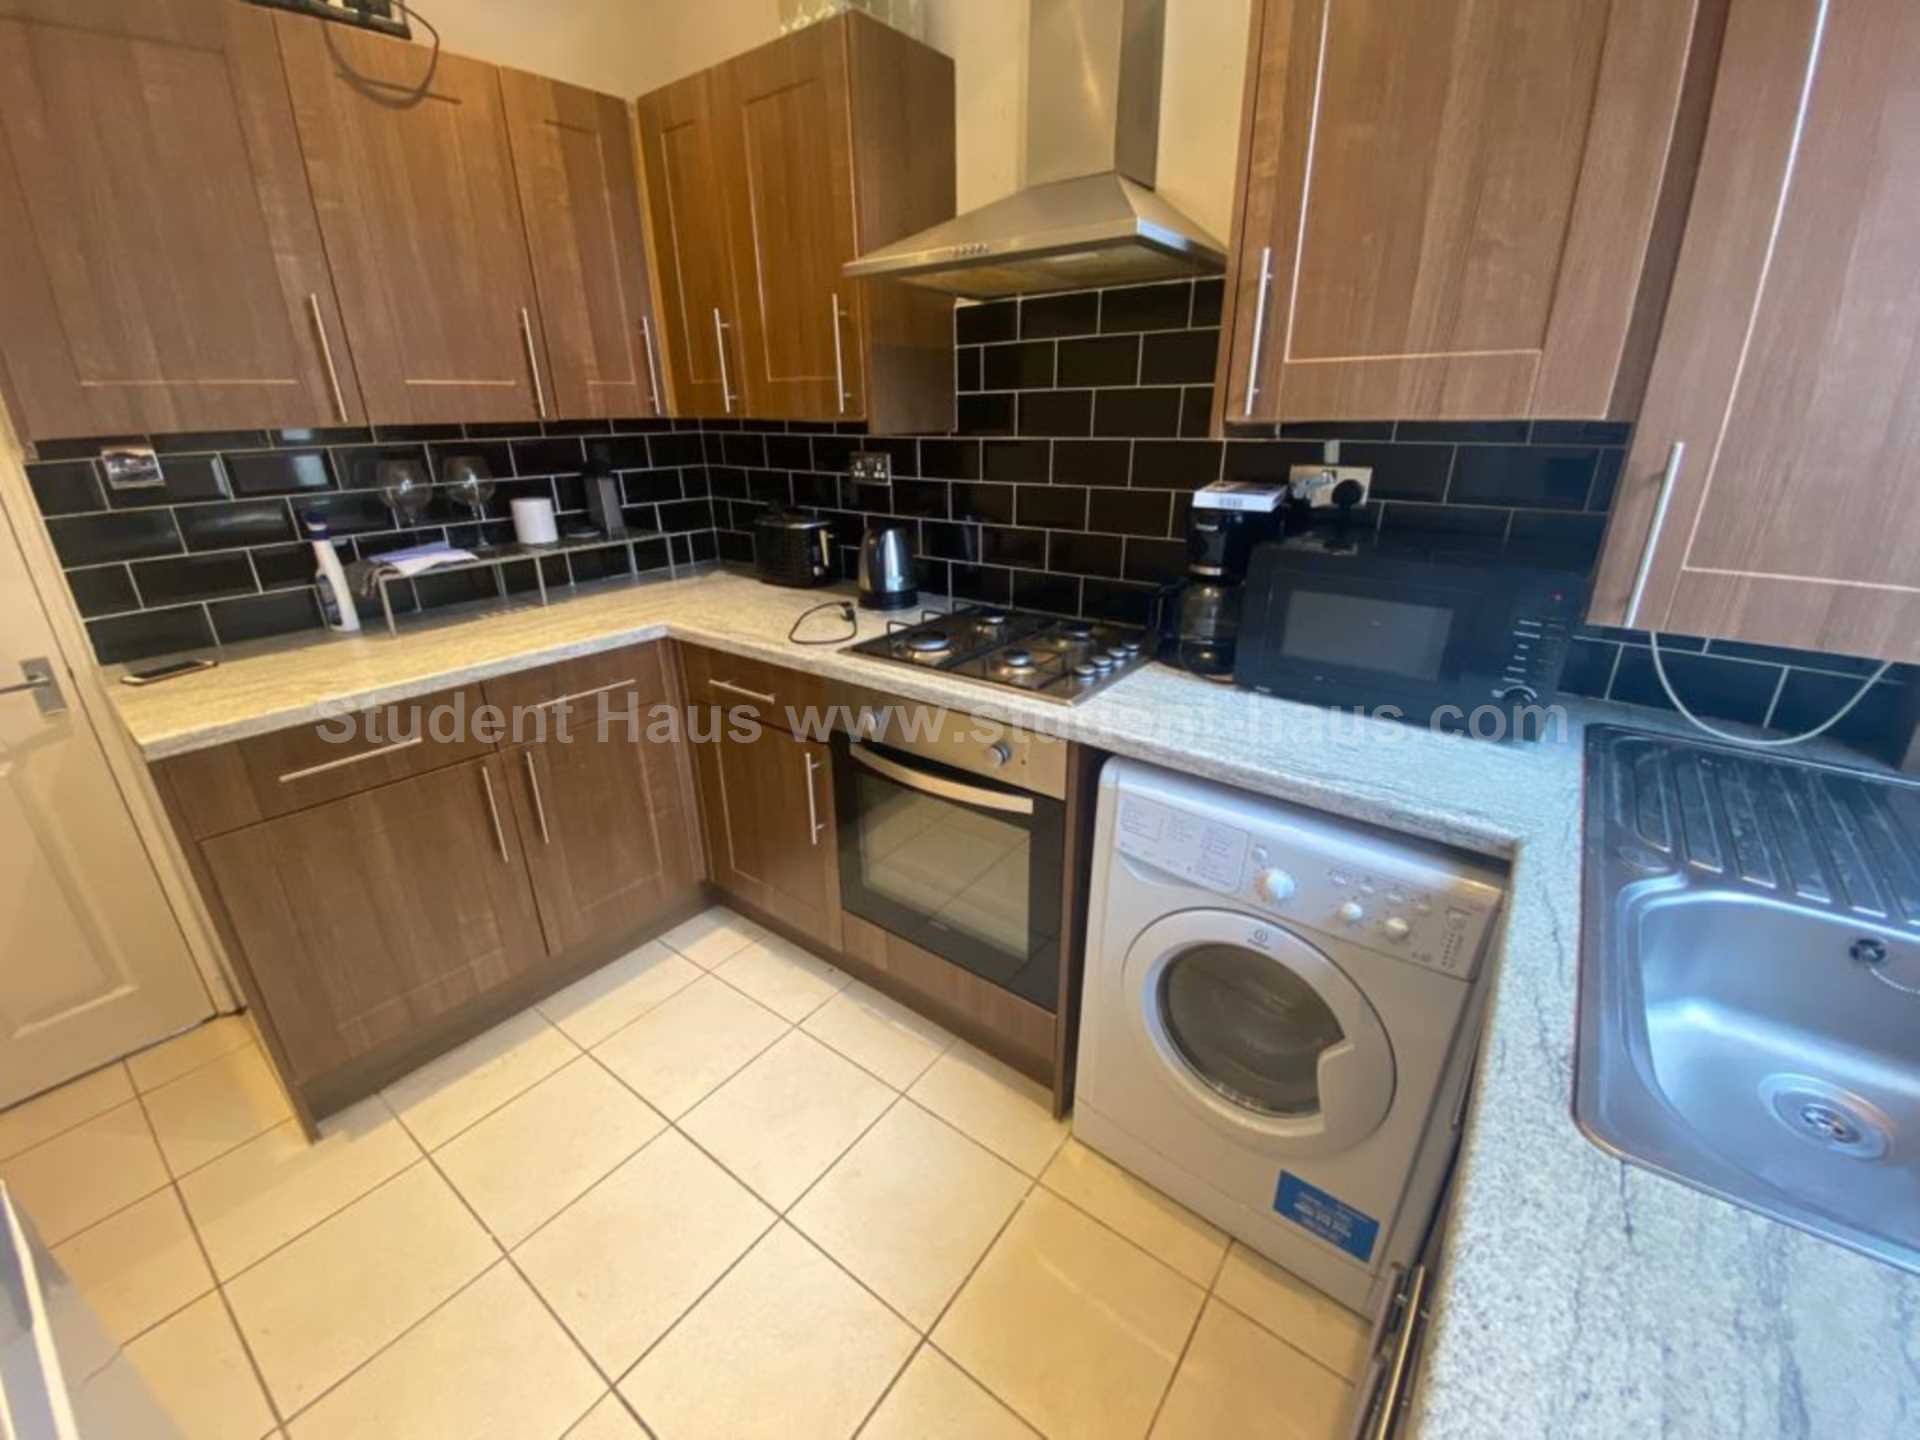 4 bed Room for rent in Liverpool. From Student Haus